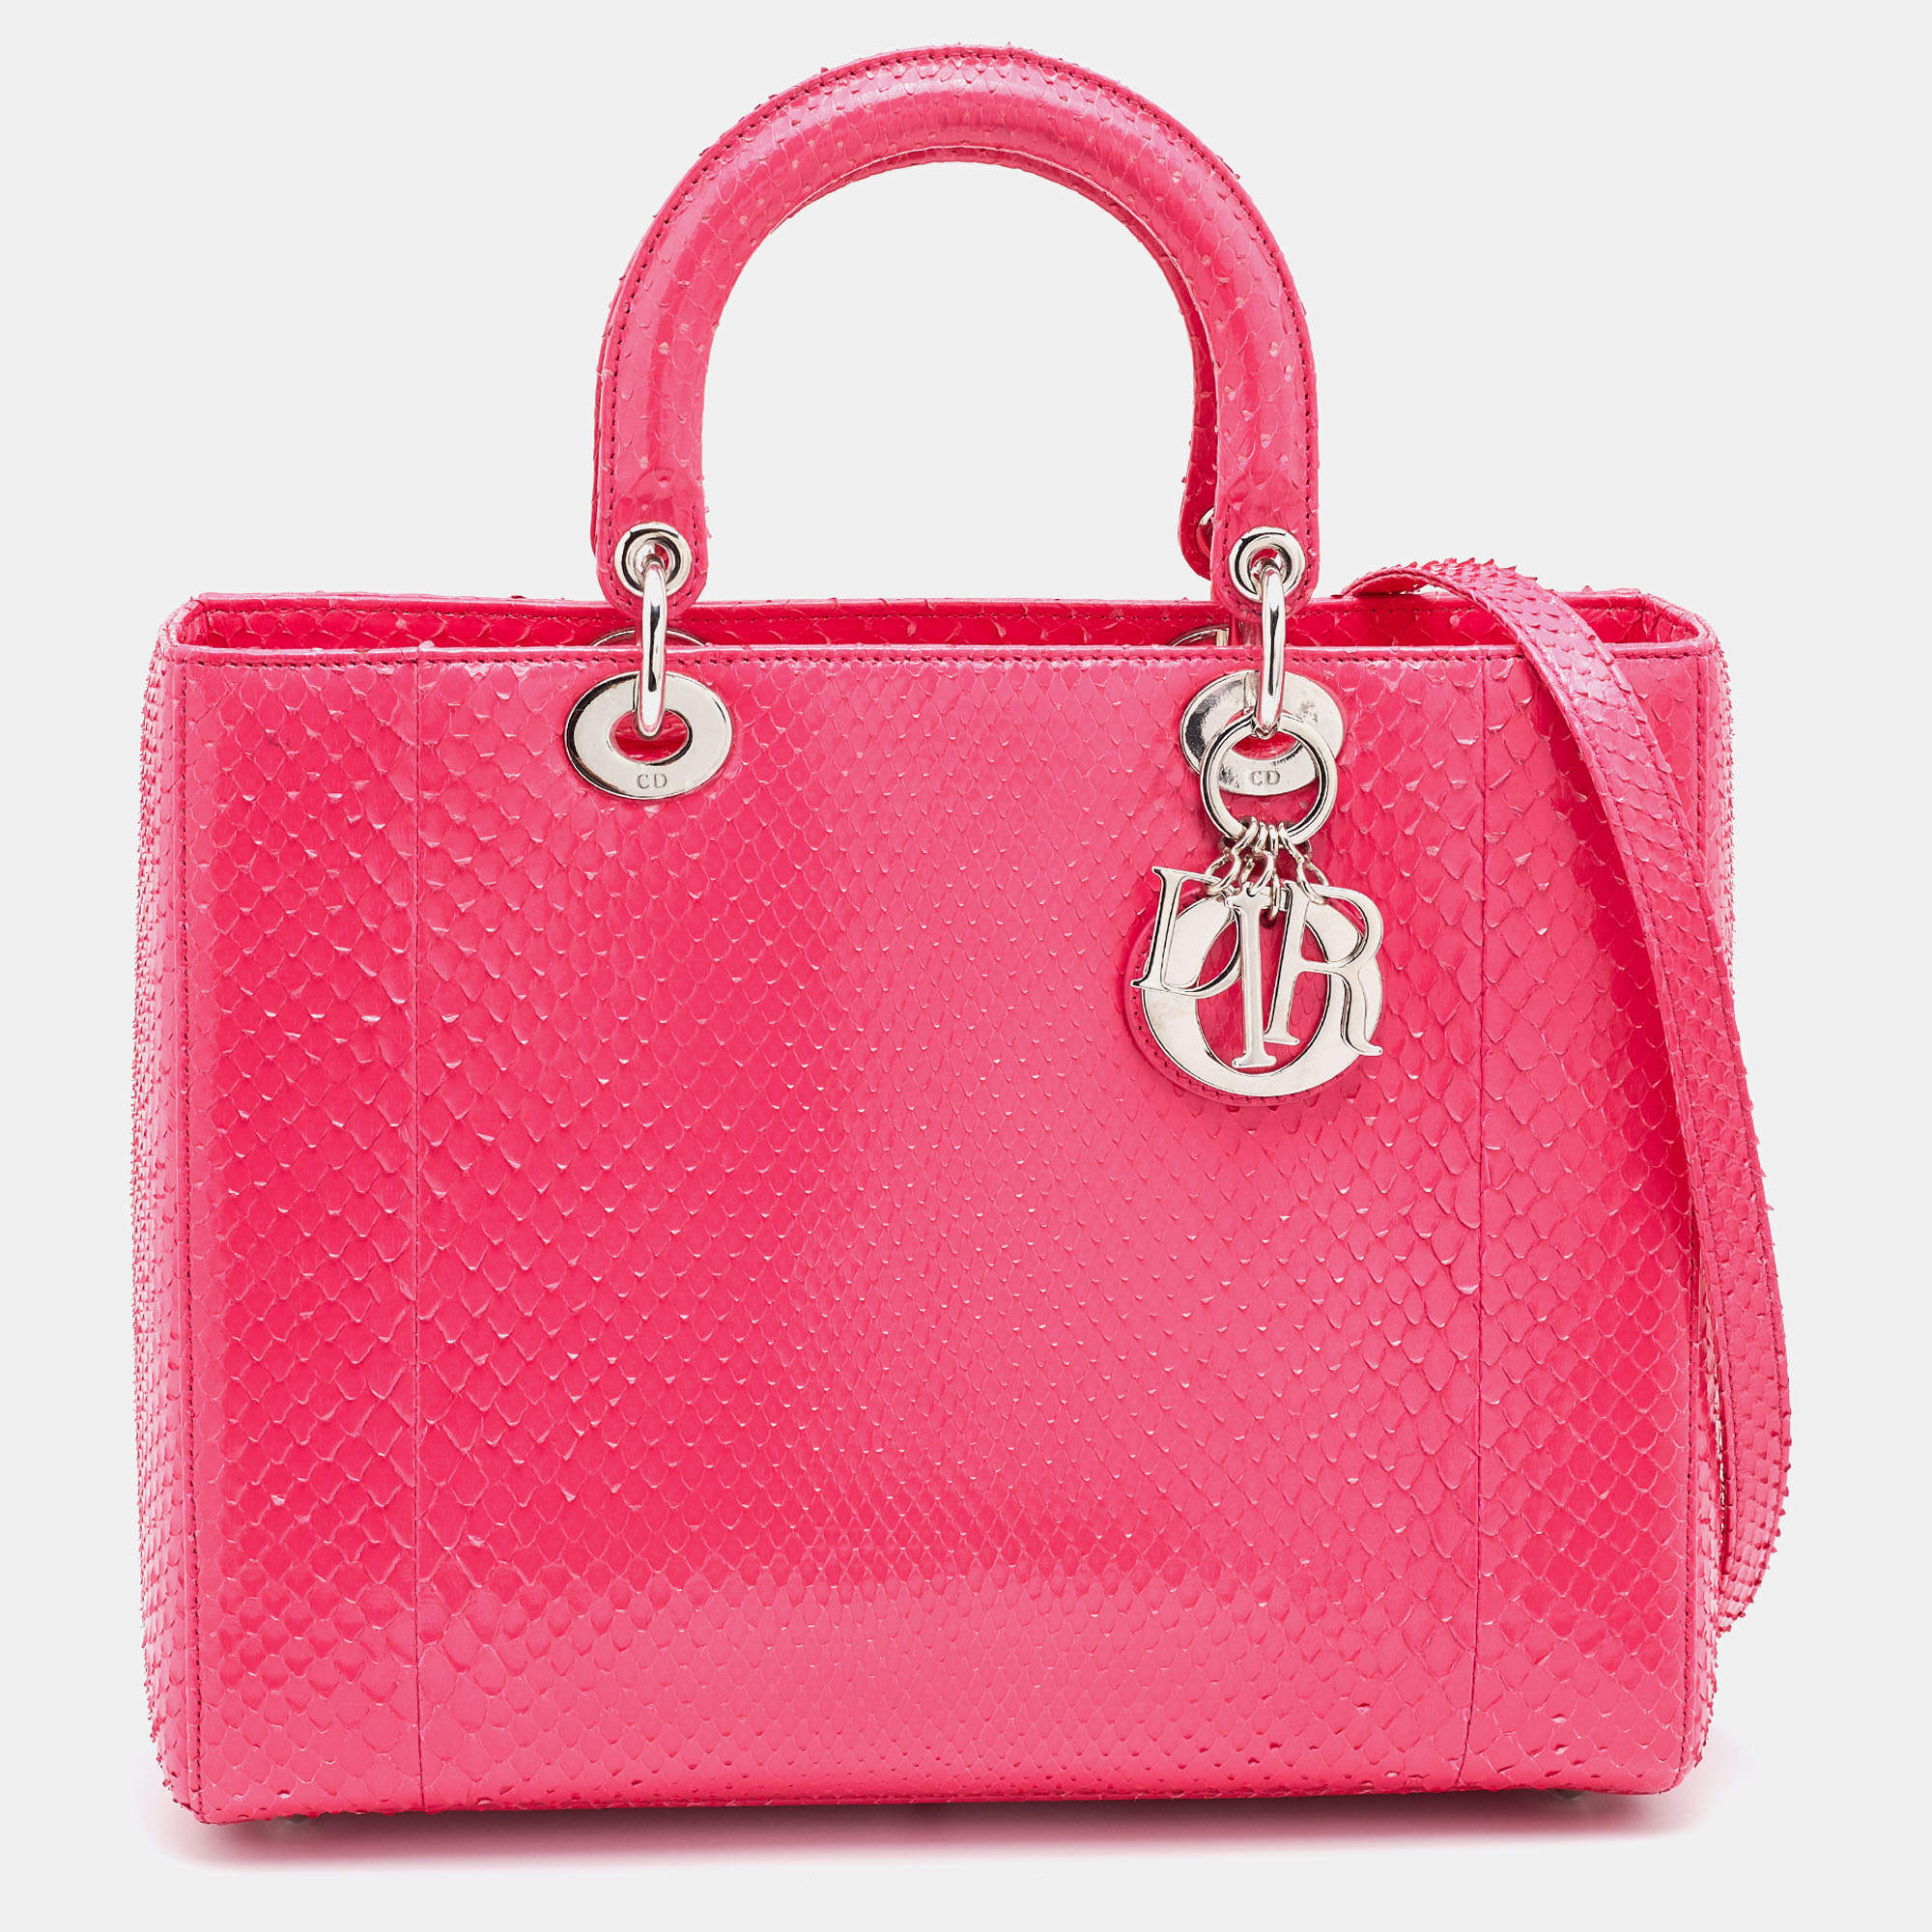 Dior Pink Python Leather Large Lady Dior Tote